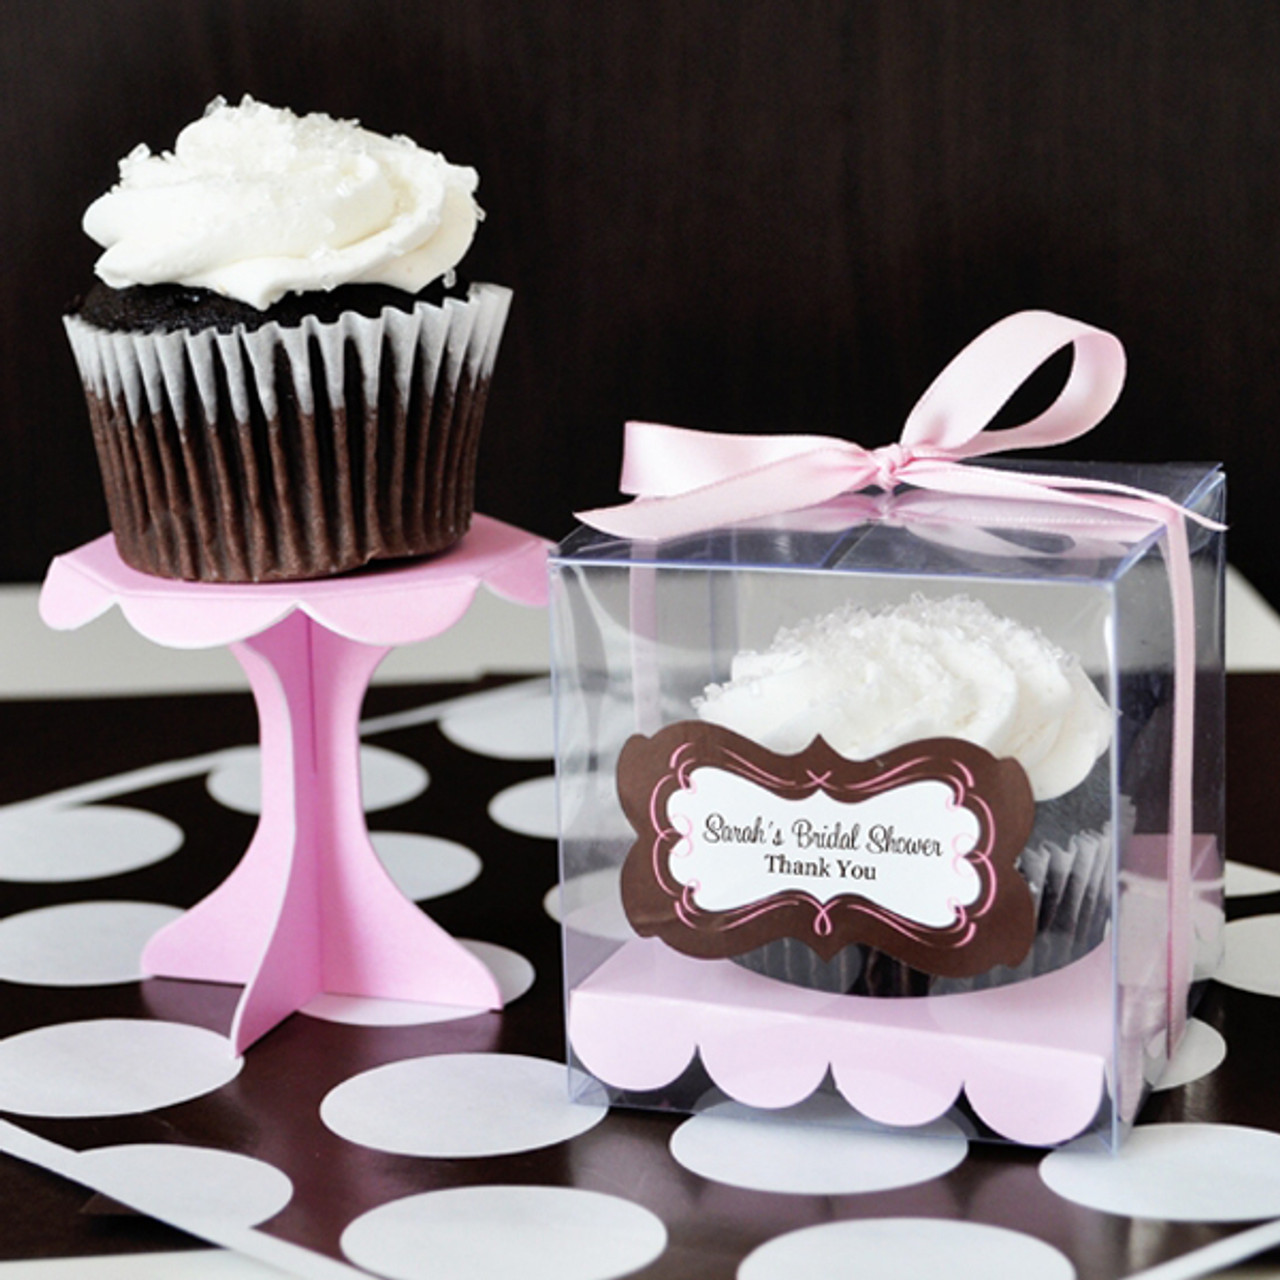 https://cdn11.bigcommerce.com/s-8bfcbt/images/stencil/1280x1280/products/1230/2030/baby_shower_cupcake_favor_containers__99237.1383186075.jpg?c=2